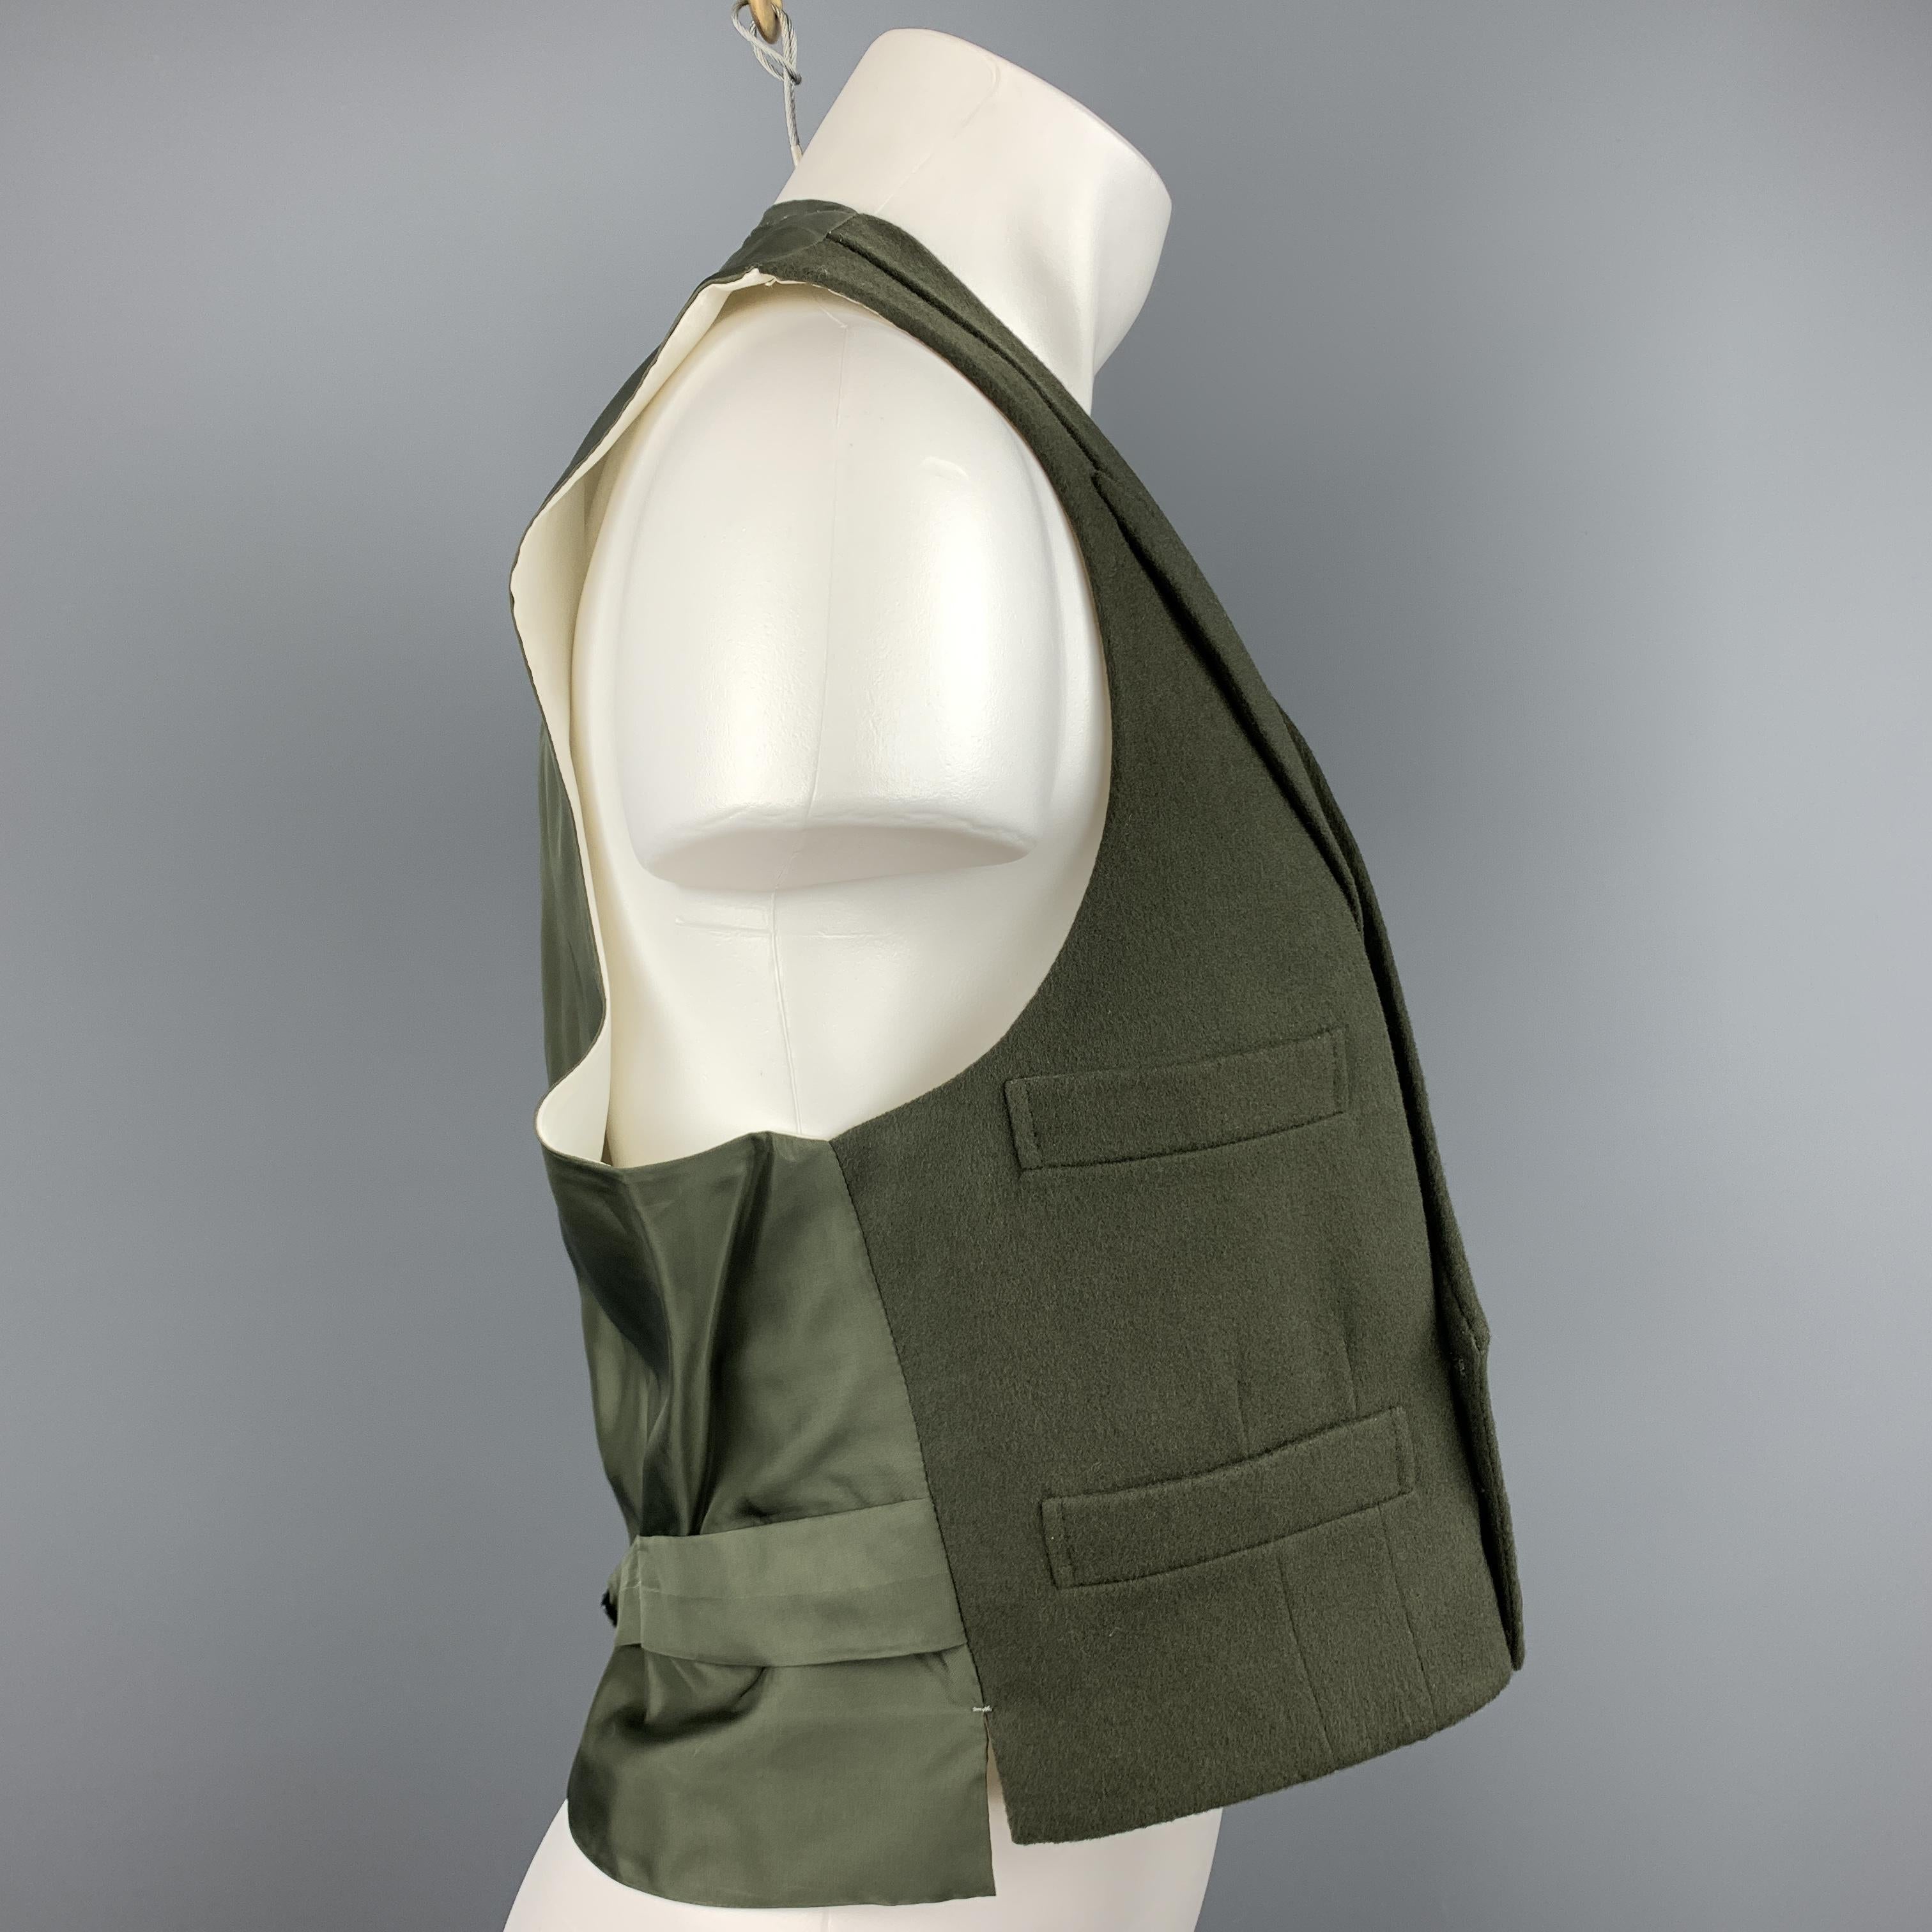 Custom Made HENRY POOLE & CO of Savile Row vest comes in a forest green wool featuring a peak lapel style, slit pockets, back belt, and a double breasted closure. Made in England.

Excellent Pre-Owned Condition.
Marked: (No